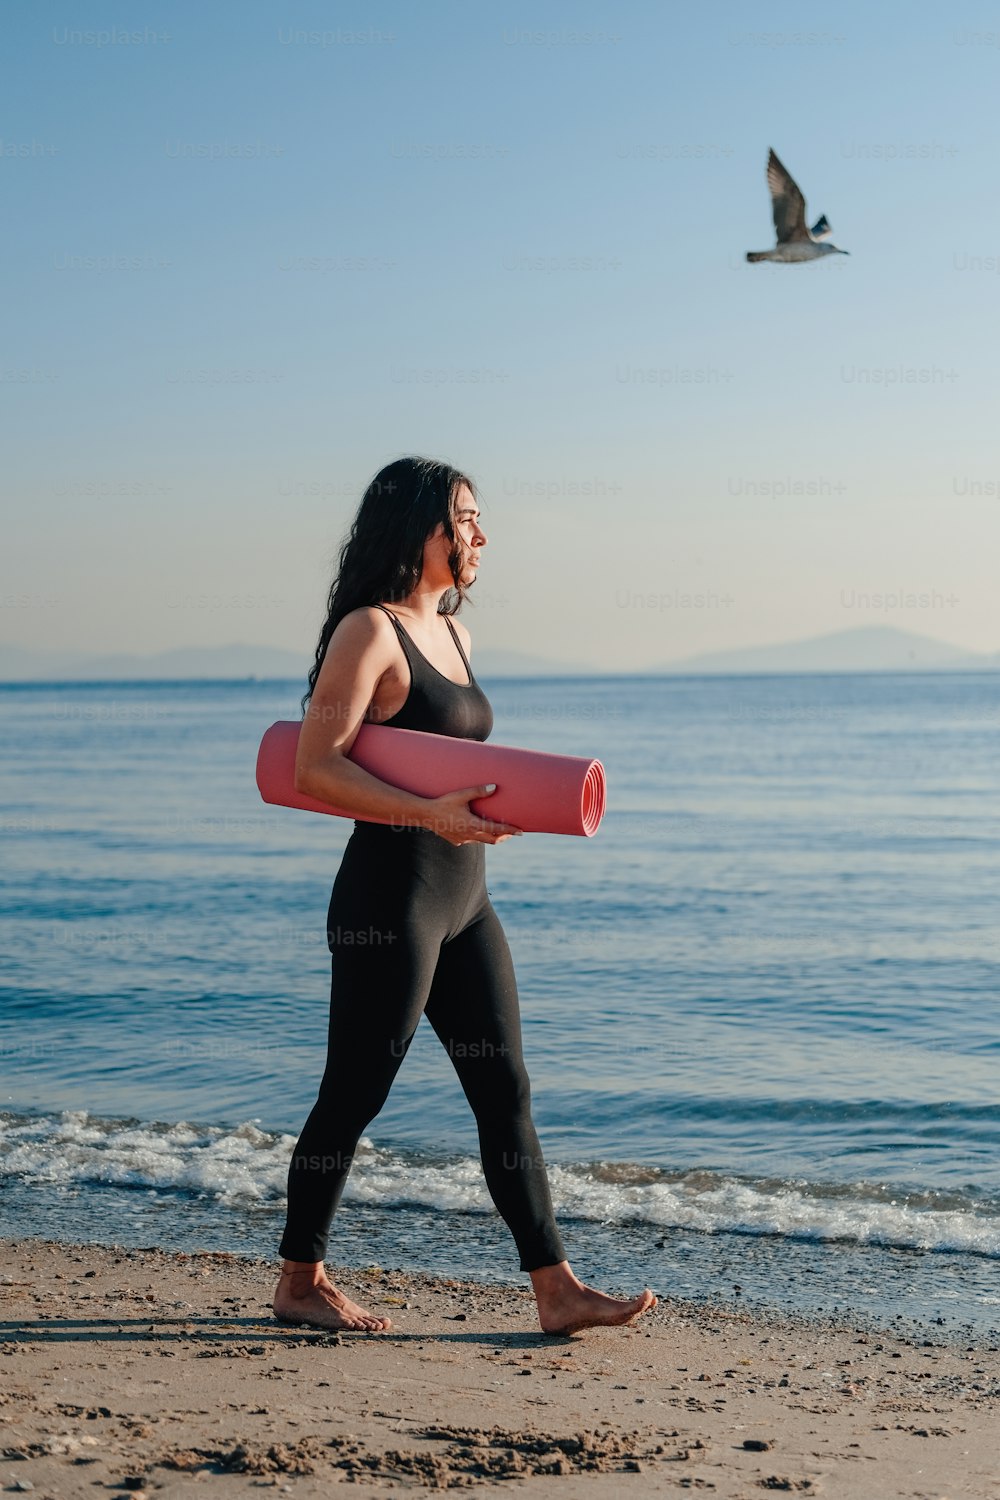 a woman walking on a beach carrying a pink surfboard